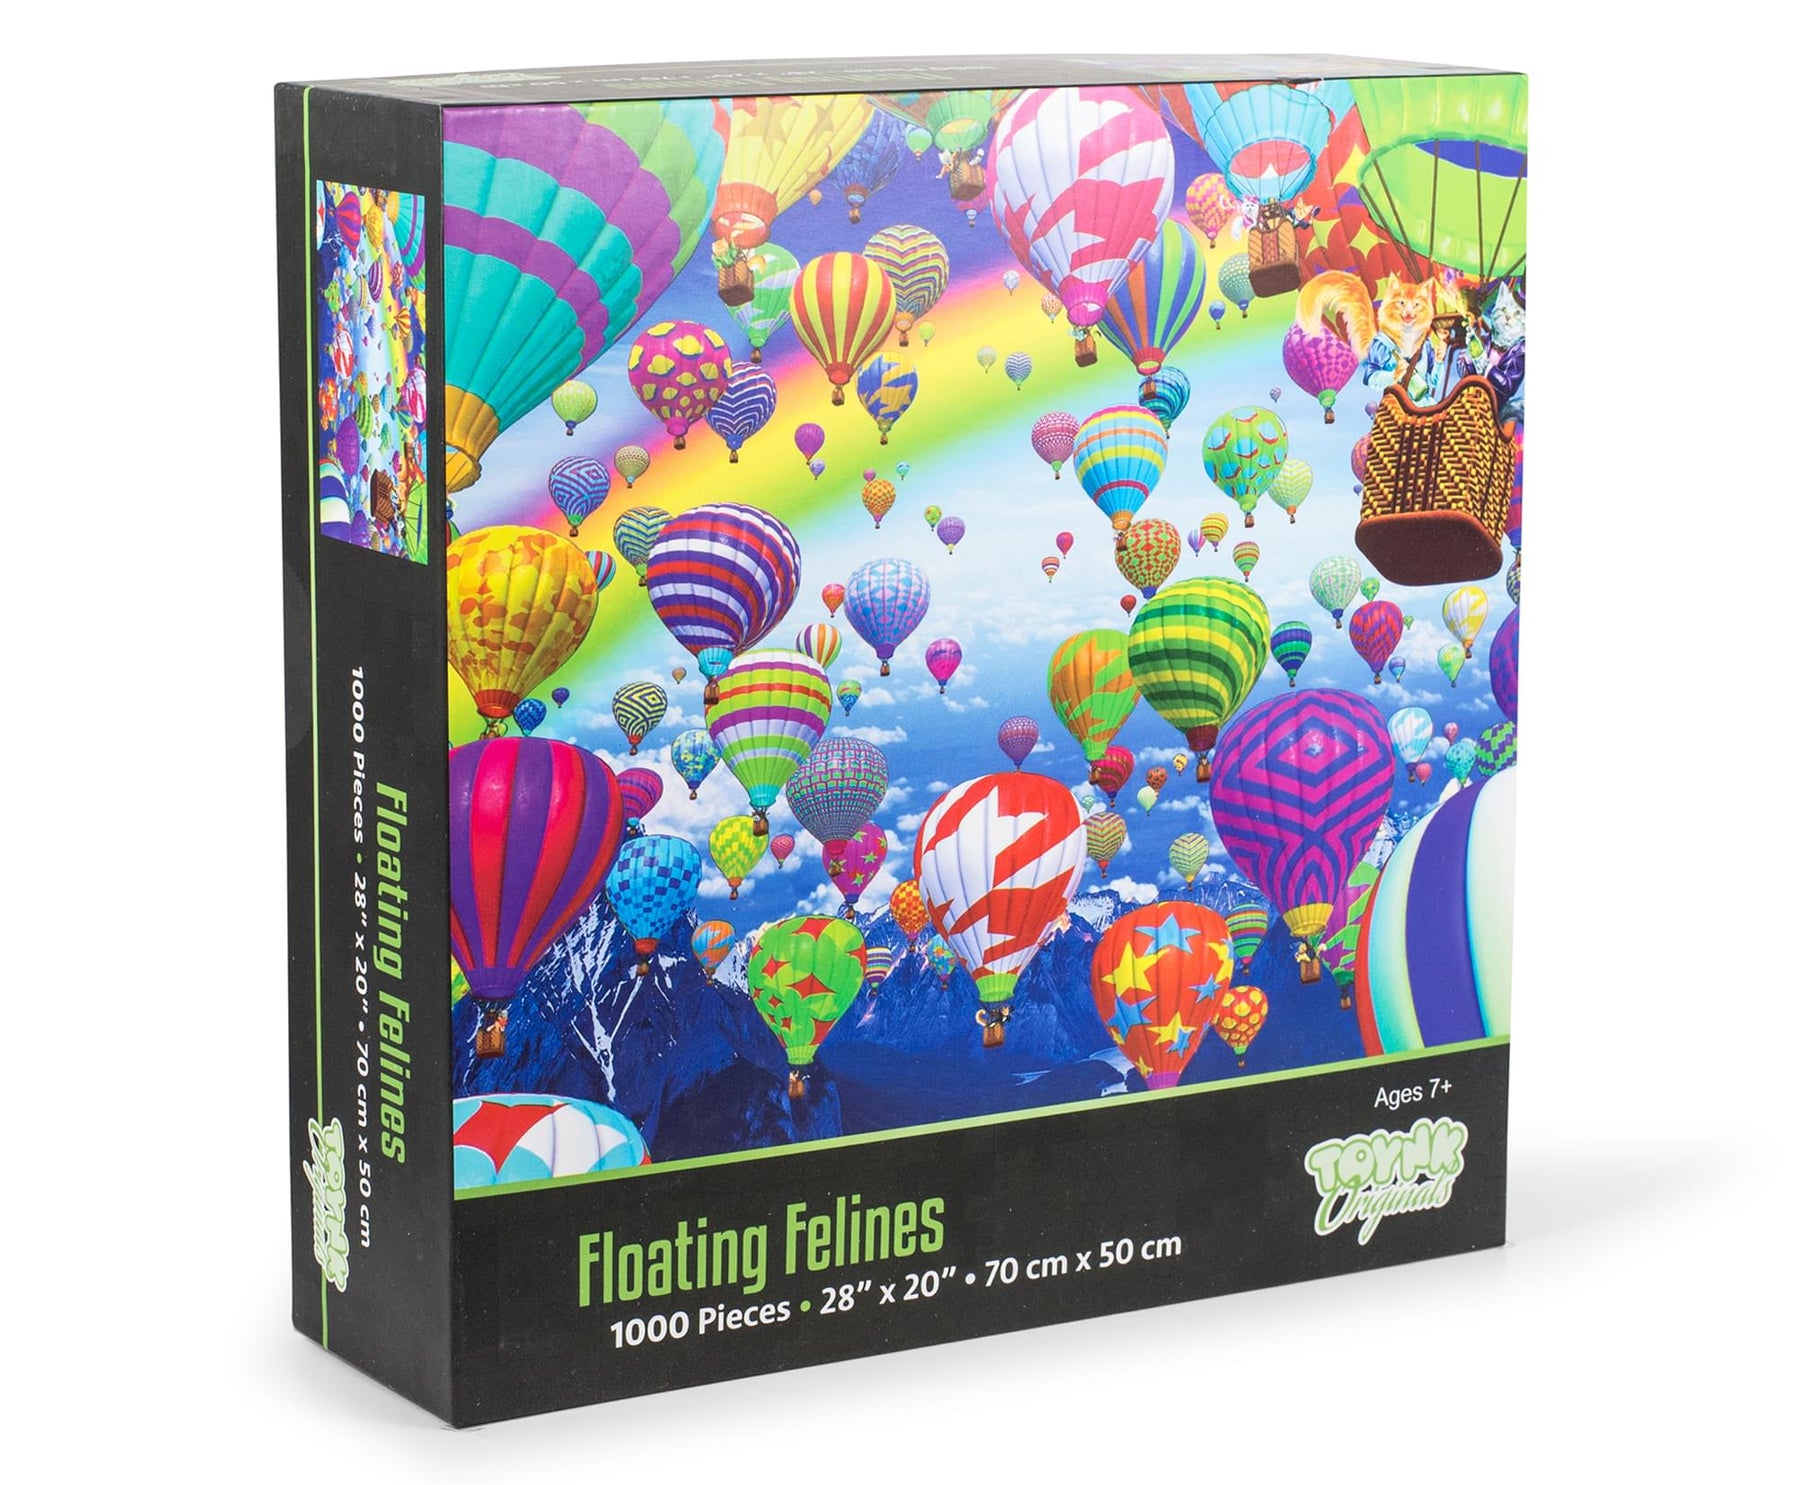 Floating Felines Hot Air Balloon Puzzle | 1000 Piece Jigsaw Puzzle